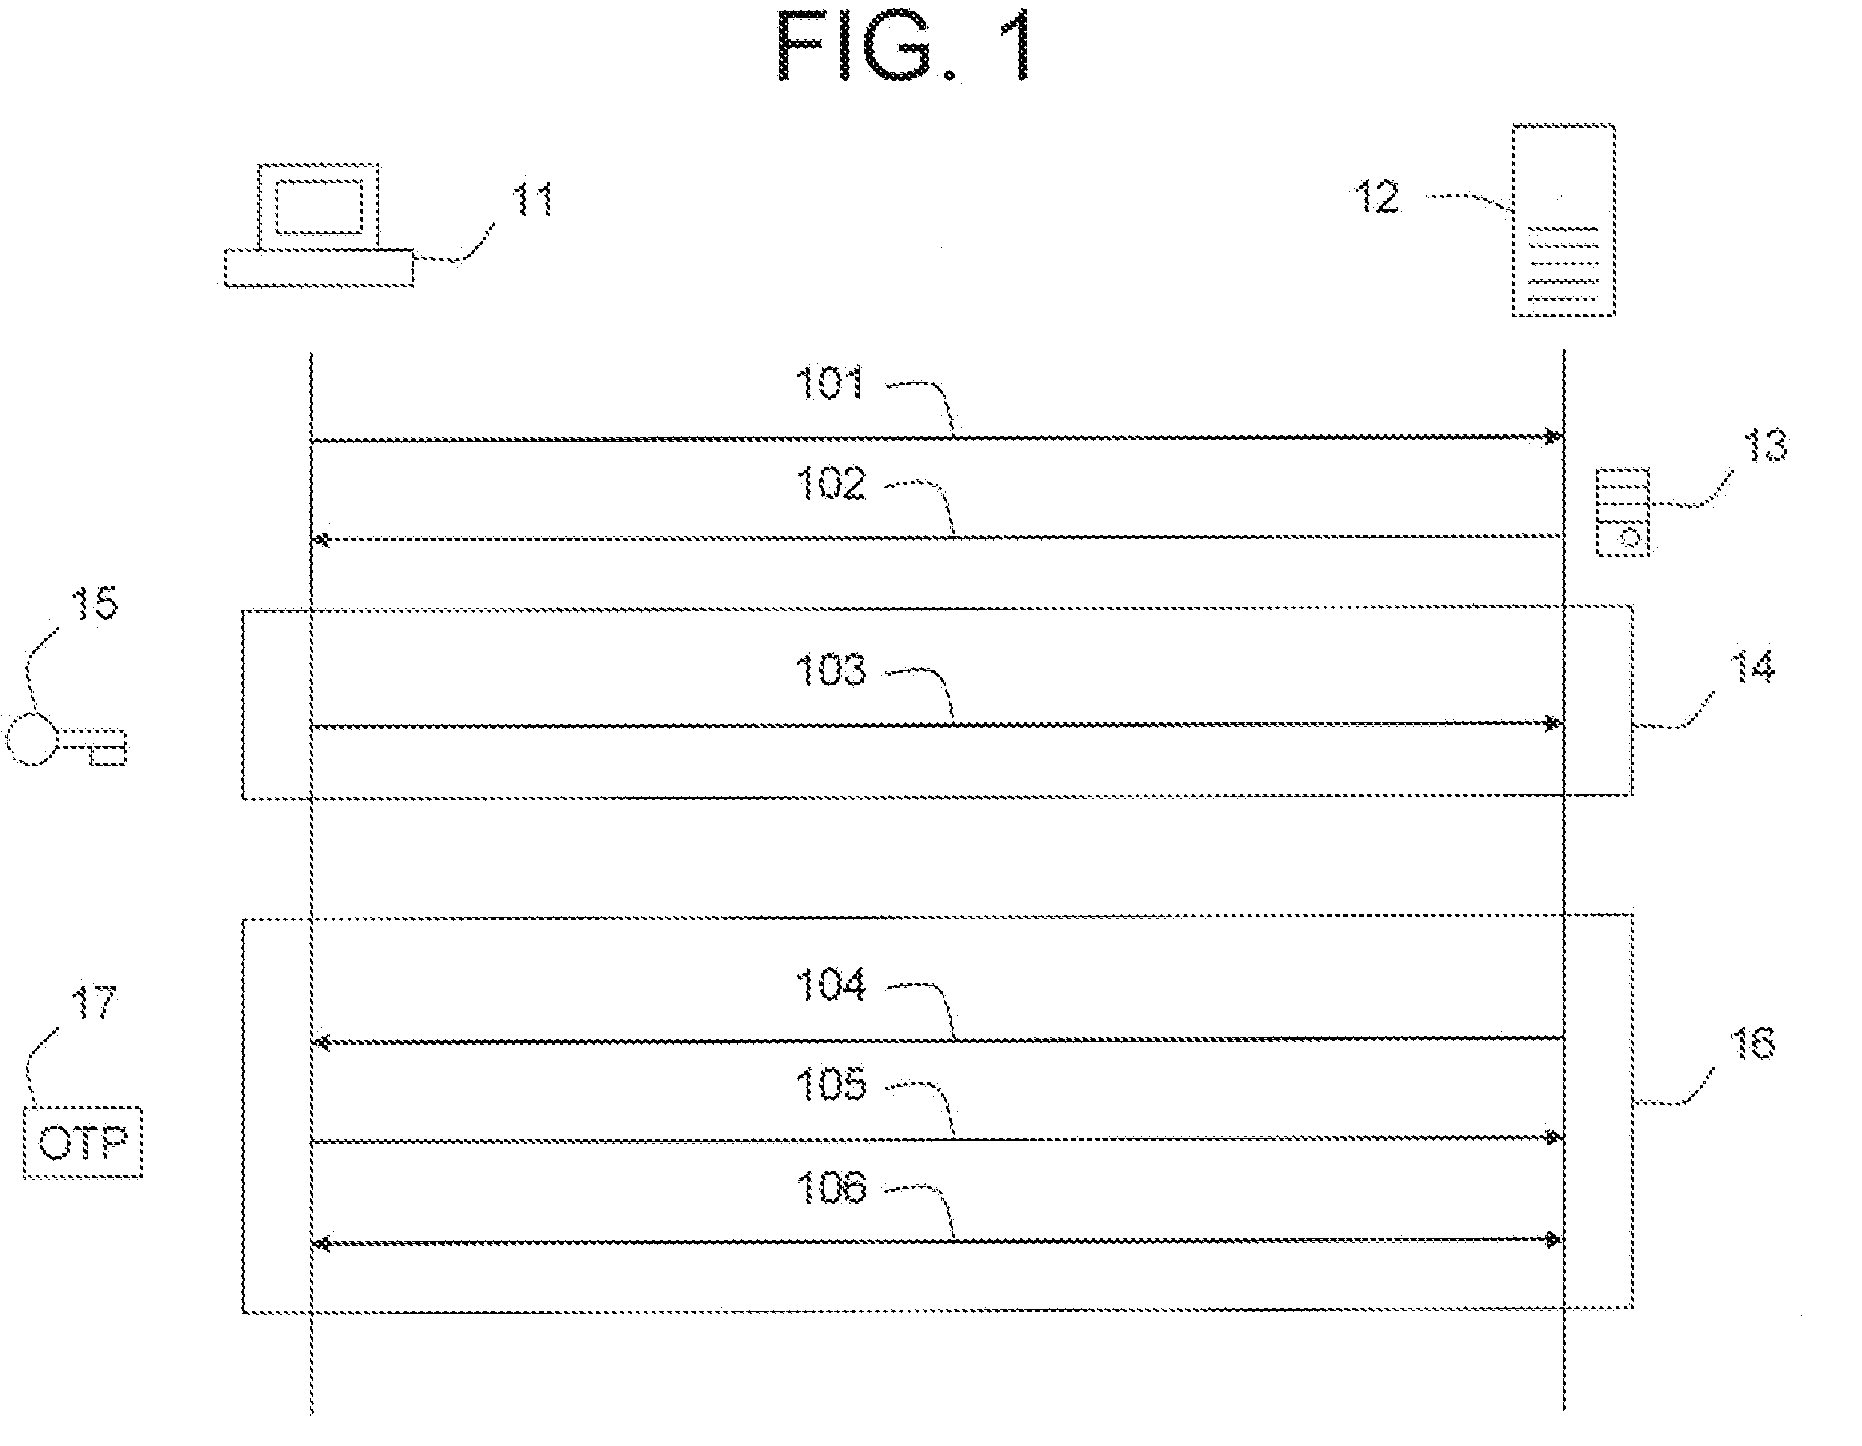 Method for server-side detection of man-in-the-middle attacks